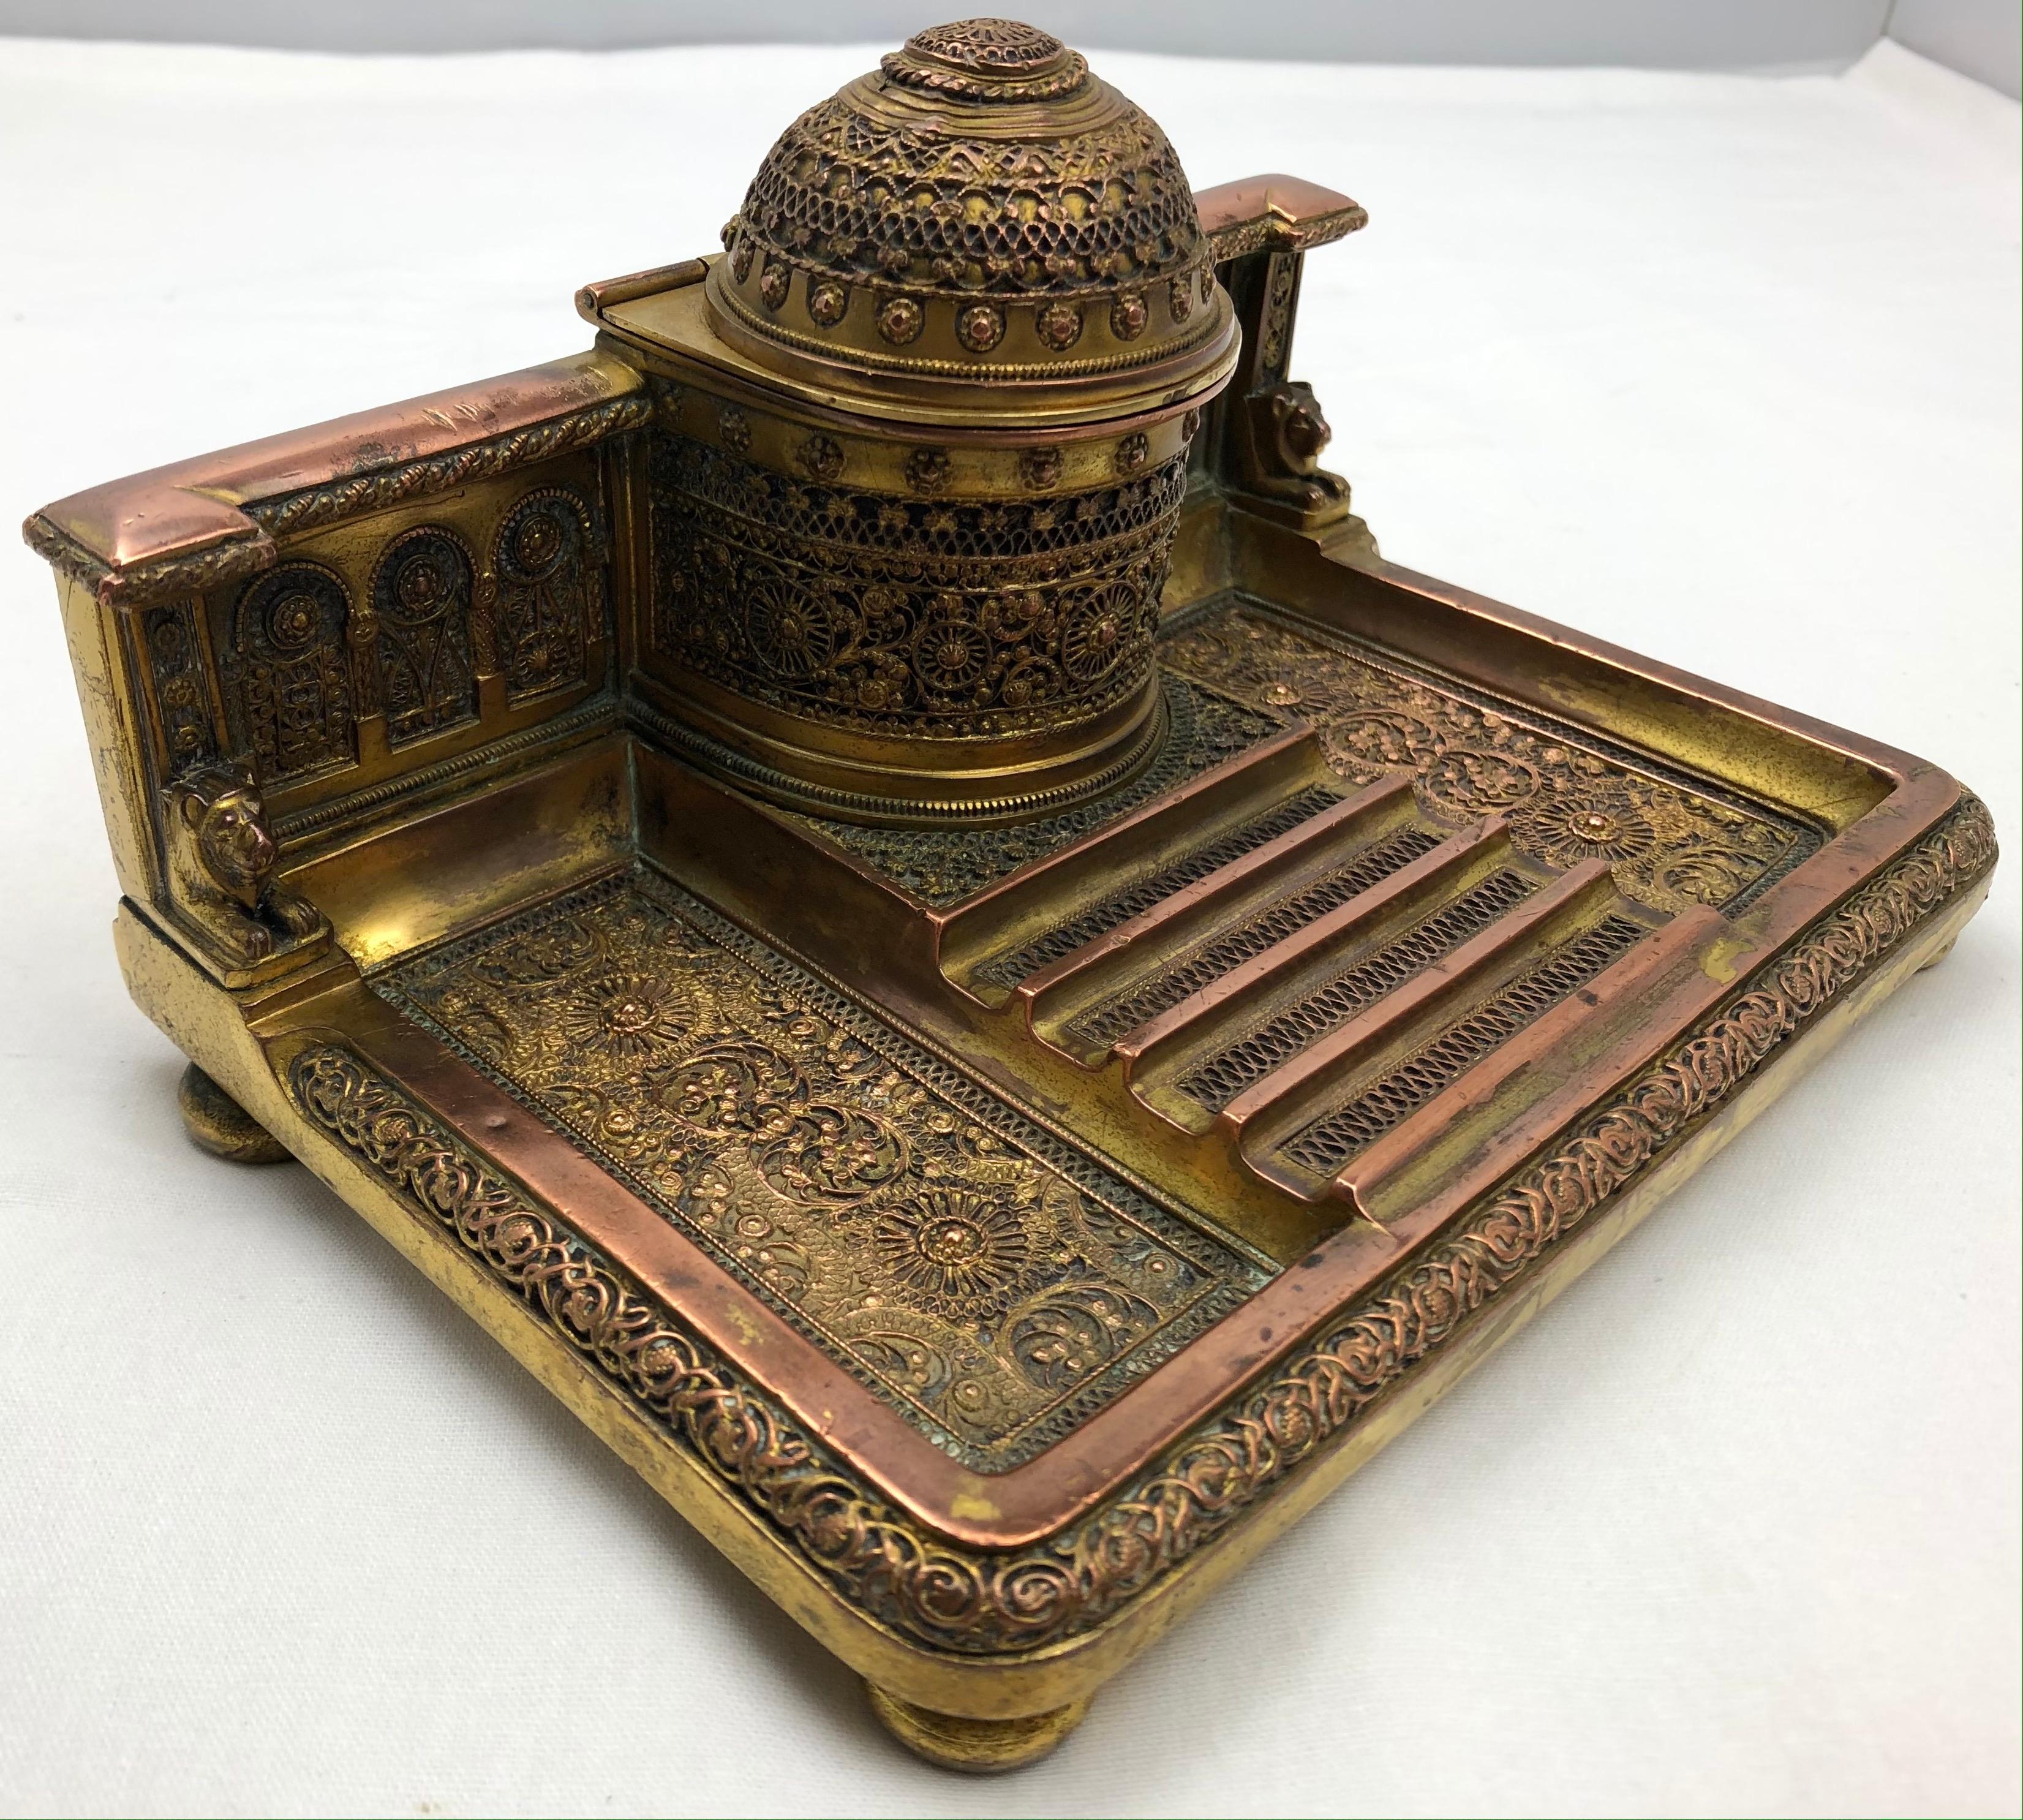 Exquisite Bizantine French 19th century Empire Napoleon III gilded bronze inkwell.
This handcrafted antique desk accessory bears the makers mark on the bottom is of exceptional quality. The details are stunning, features a crown finial top, classic